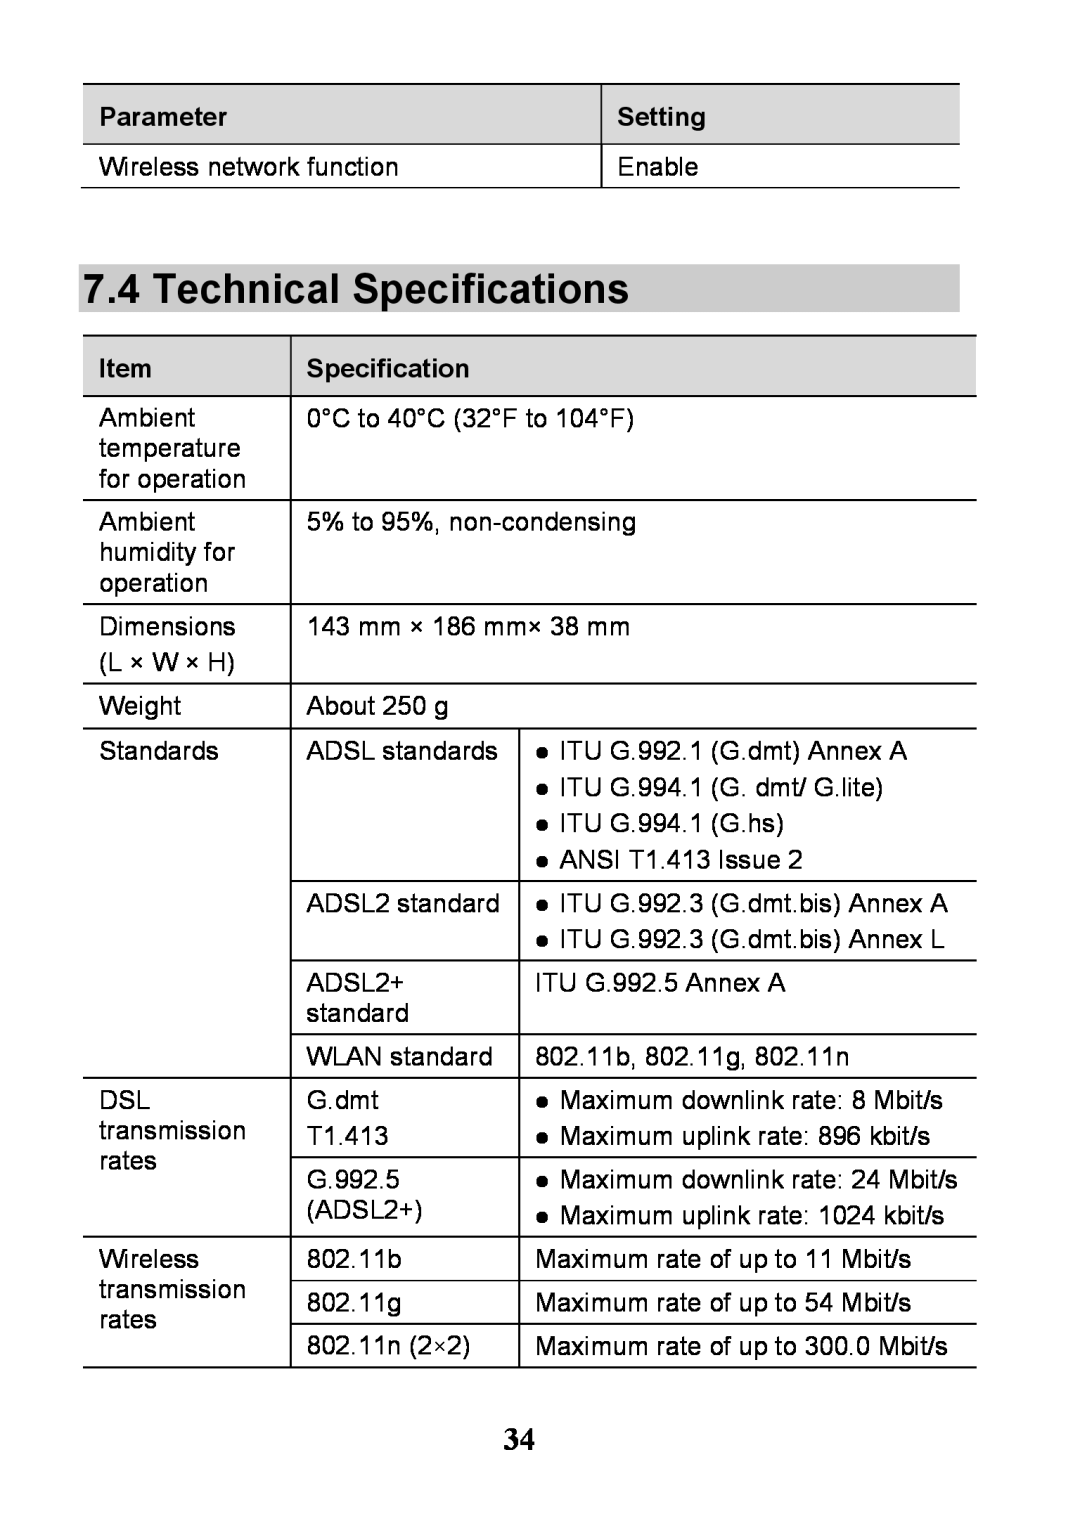 Huawei V100R001 manual Technical Specifications,  Maximum downlink rate 24 Mbit/s 